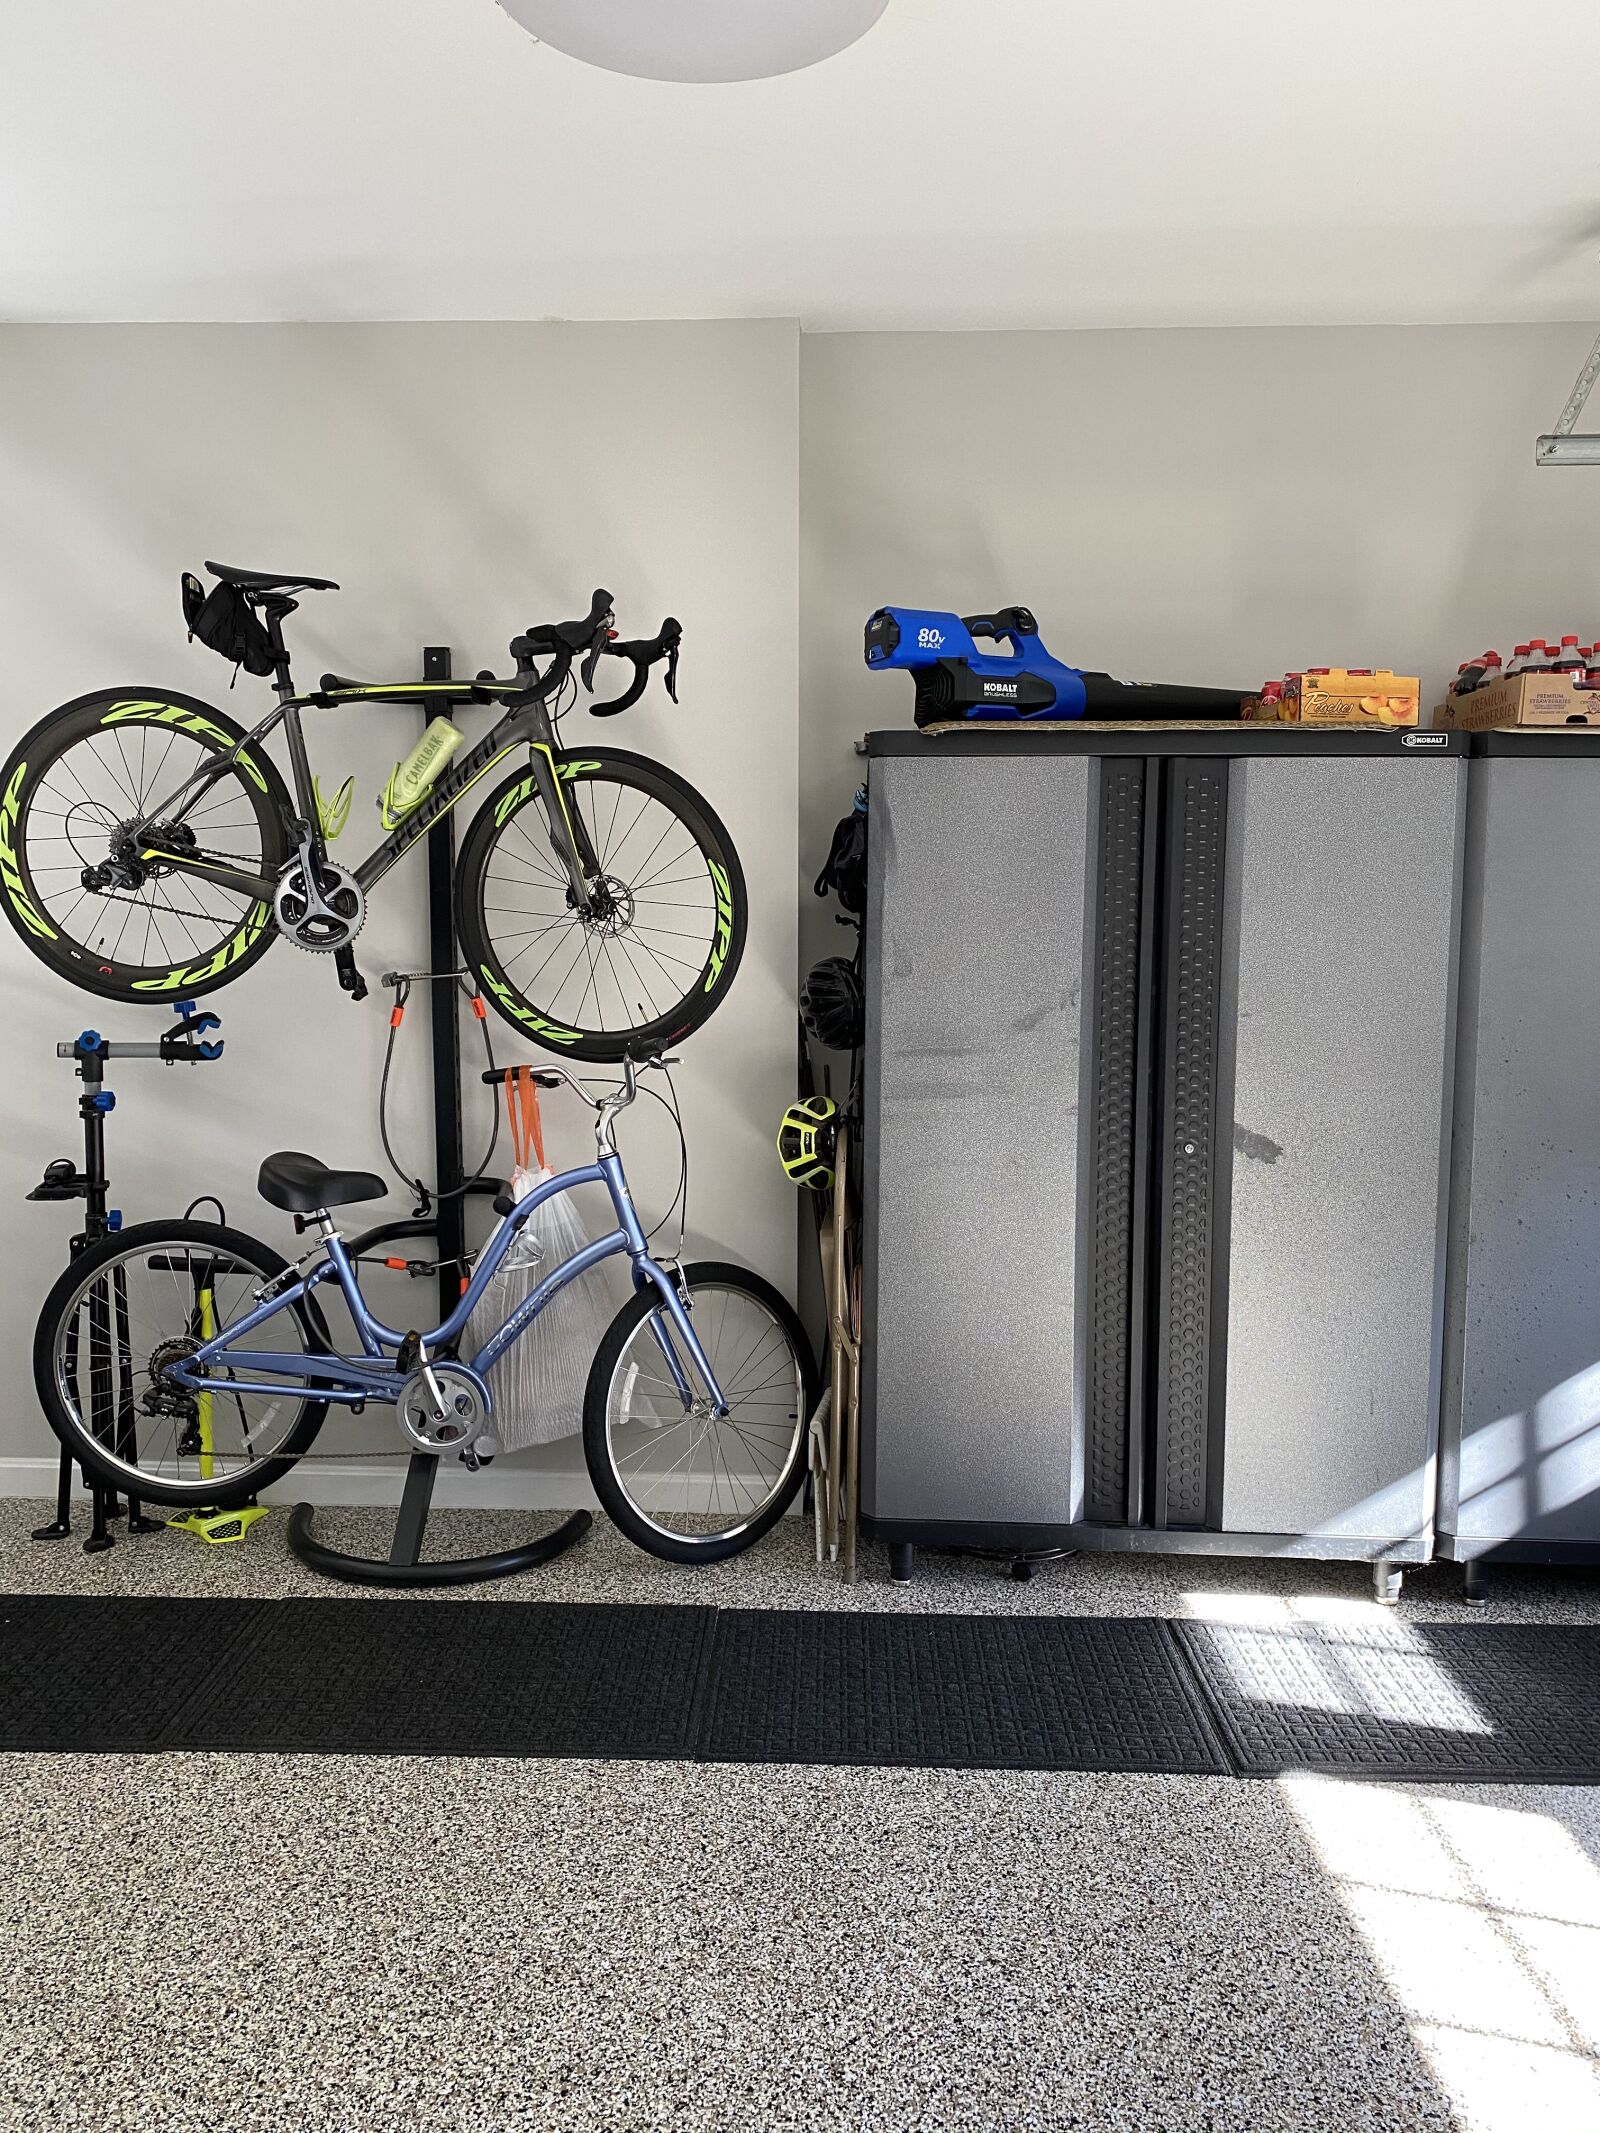 Apple iPhone 11 + iPhone 11 back dual wide camera 4.25mm f/1.8 sample photo. Bicycle, hanging, garage photography